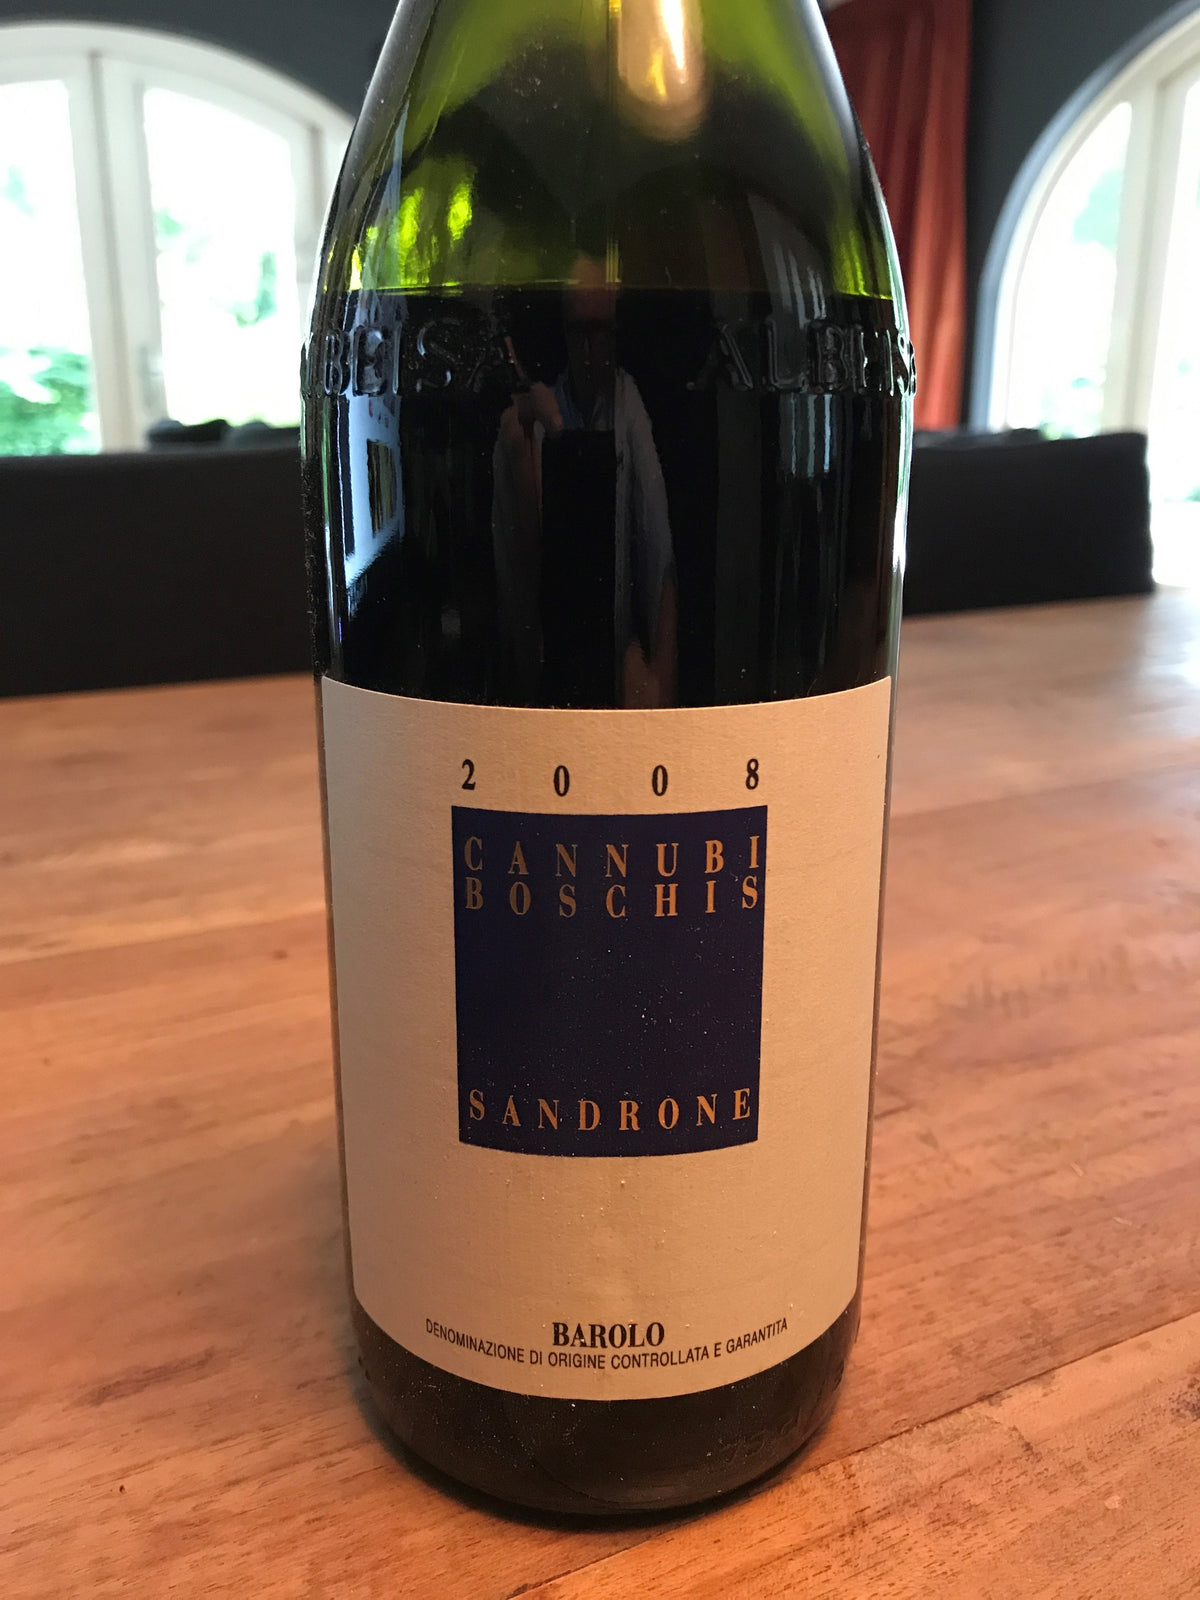 Finally a surprise from this great domaine: Sandrone